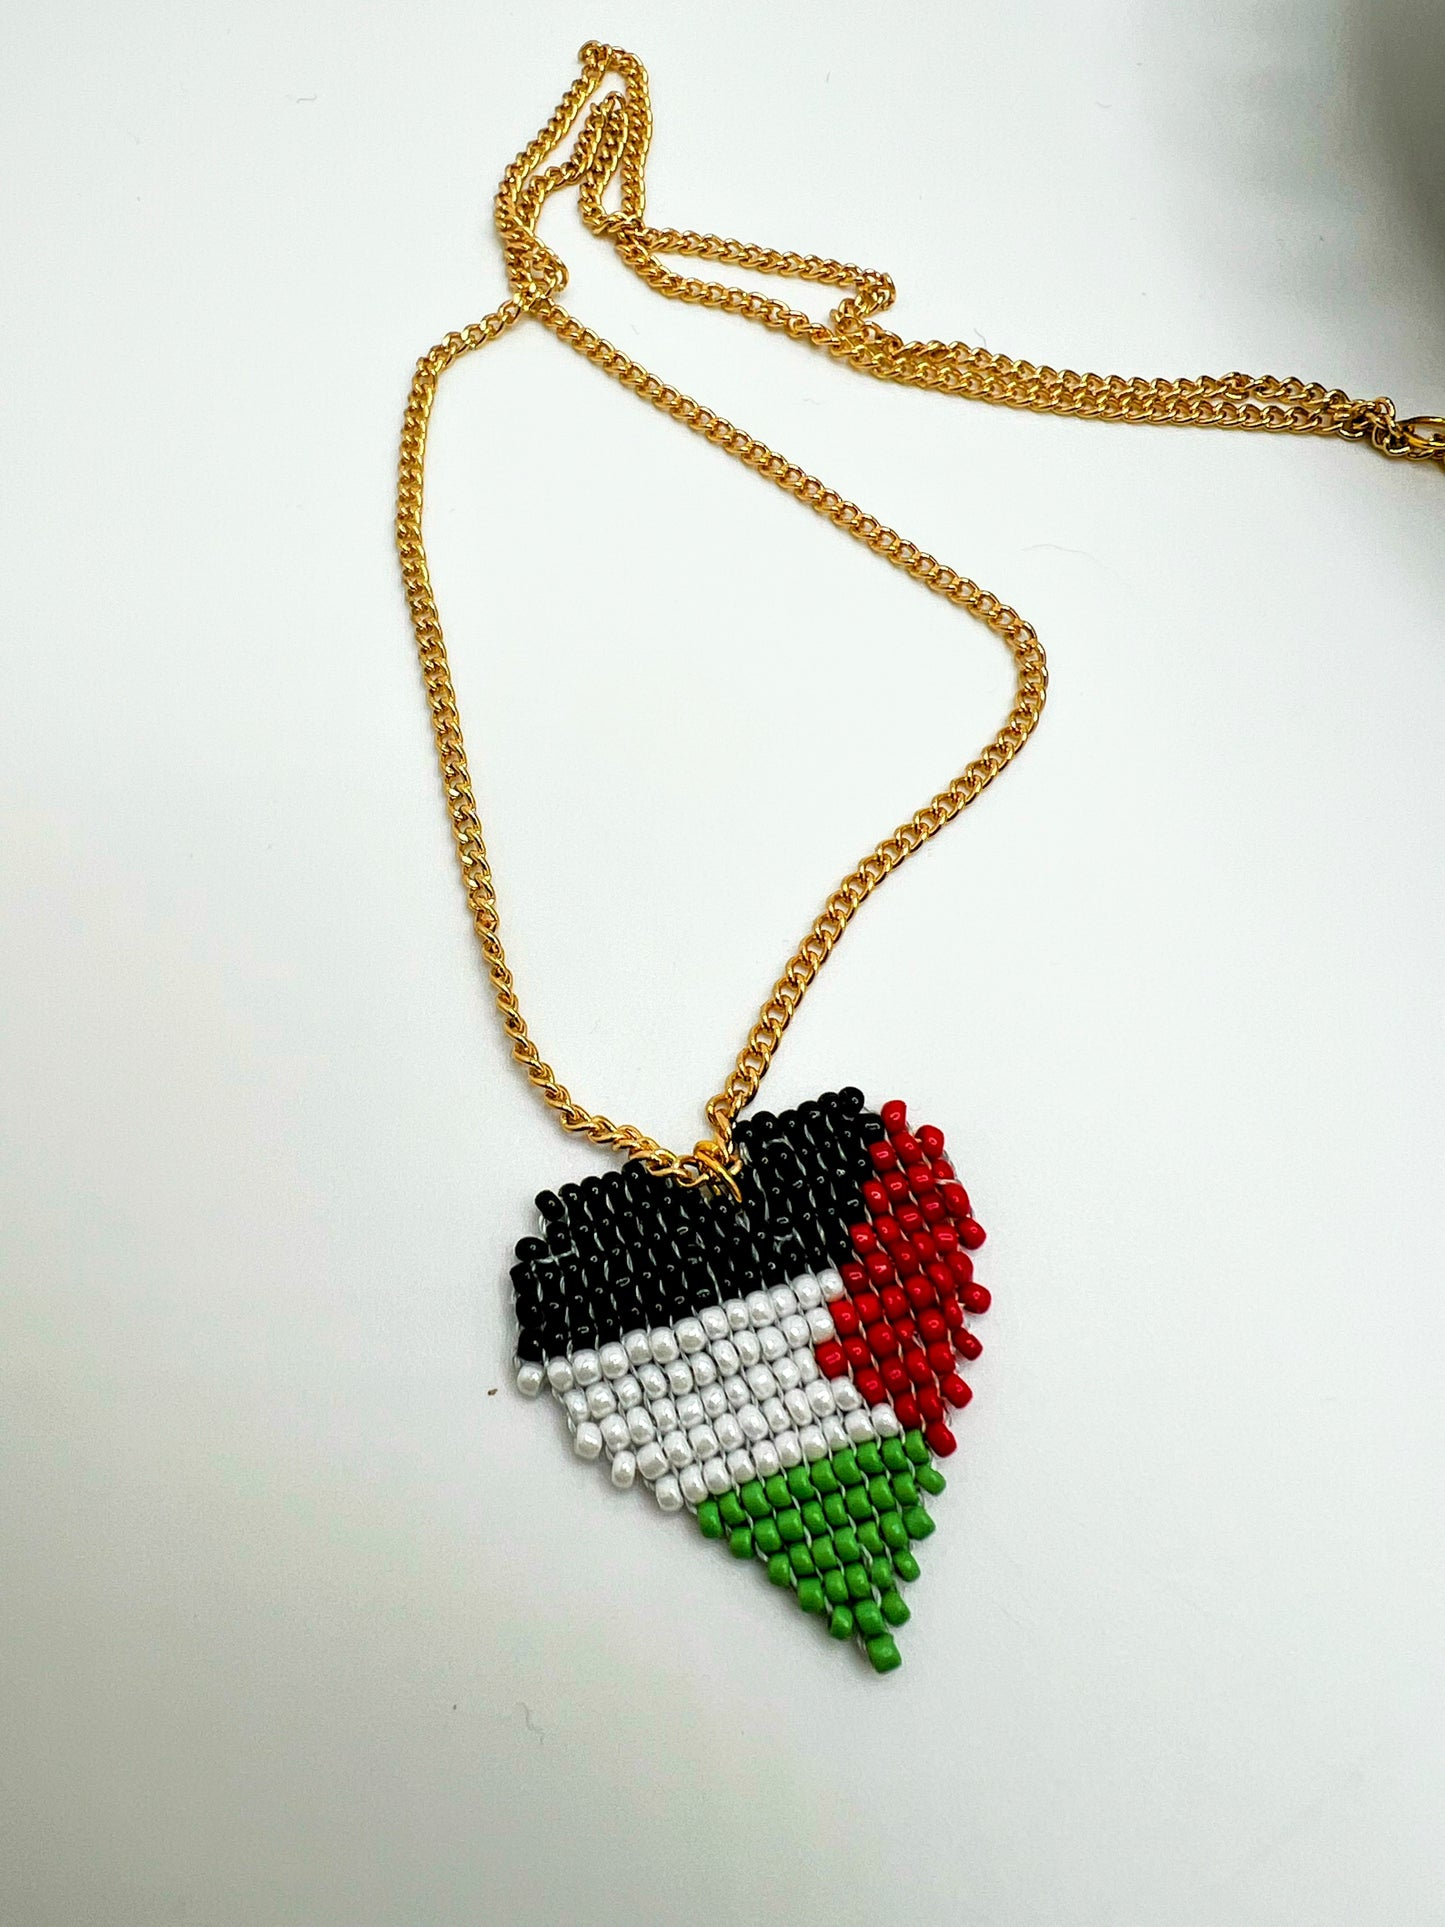 🇵🇸 Palestine Heart  Beaded Necklace